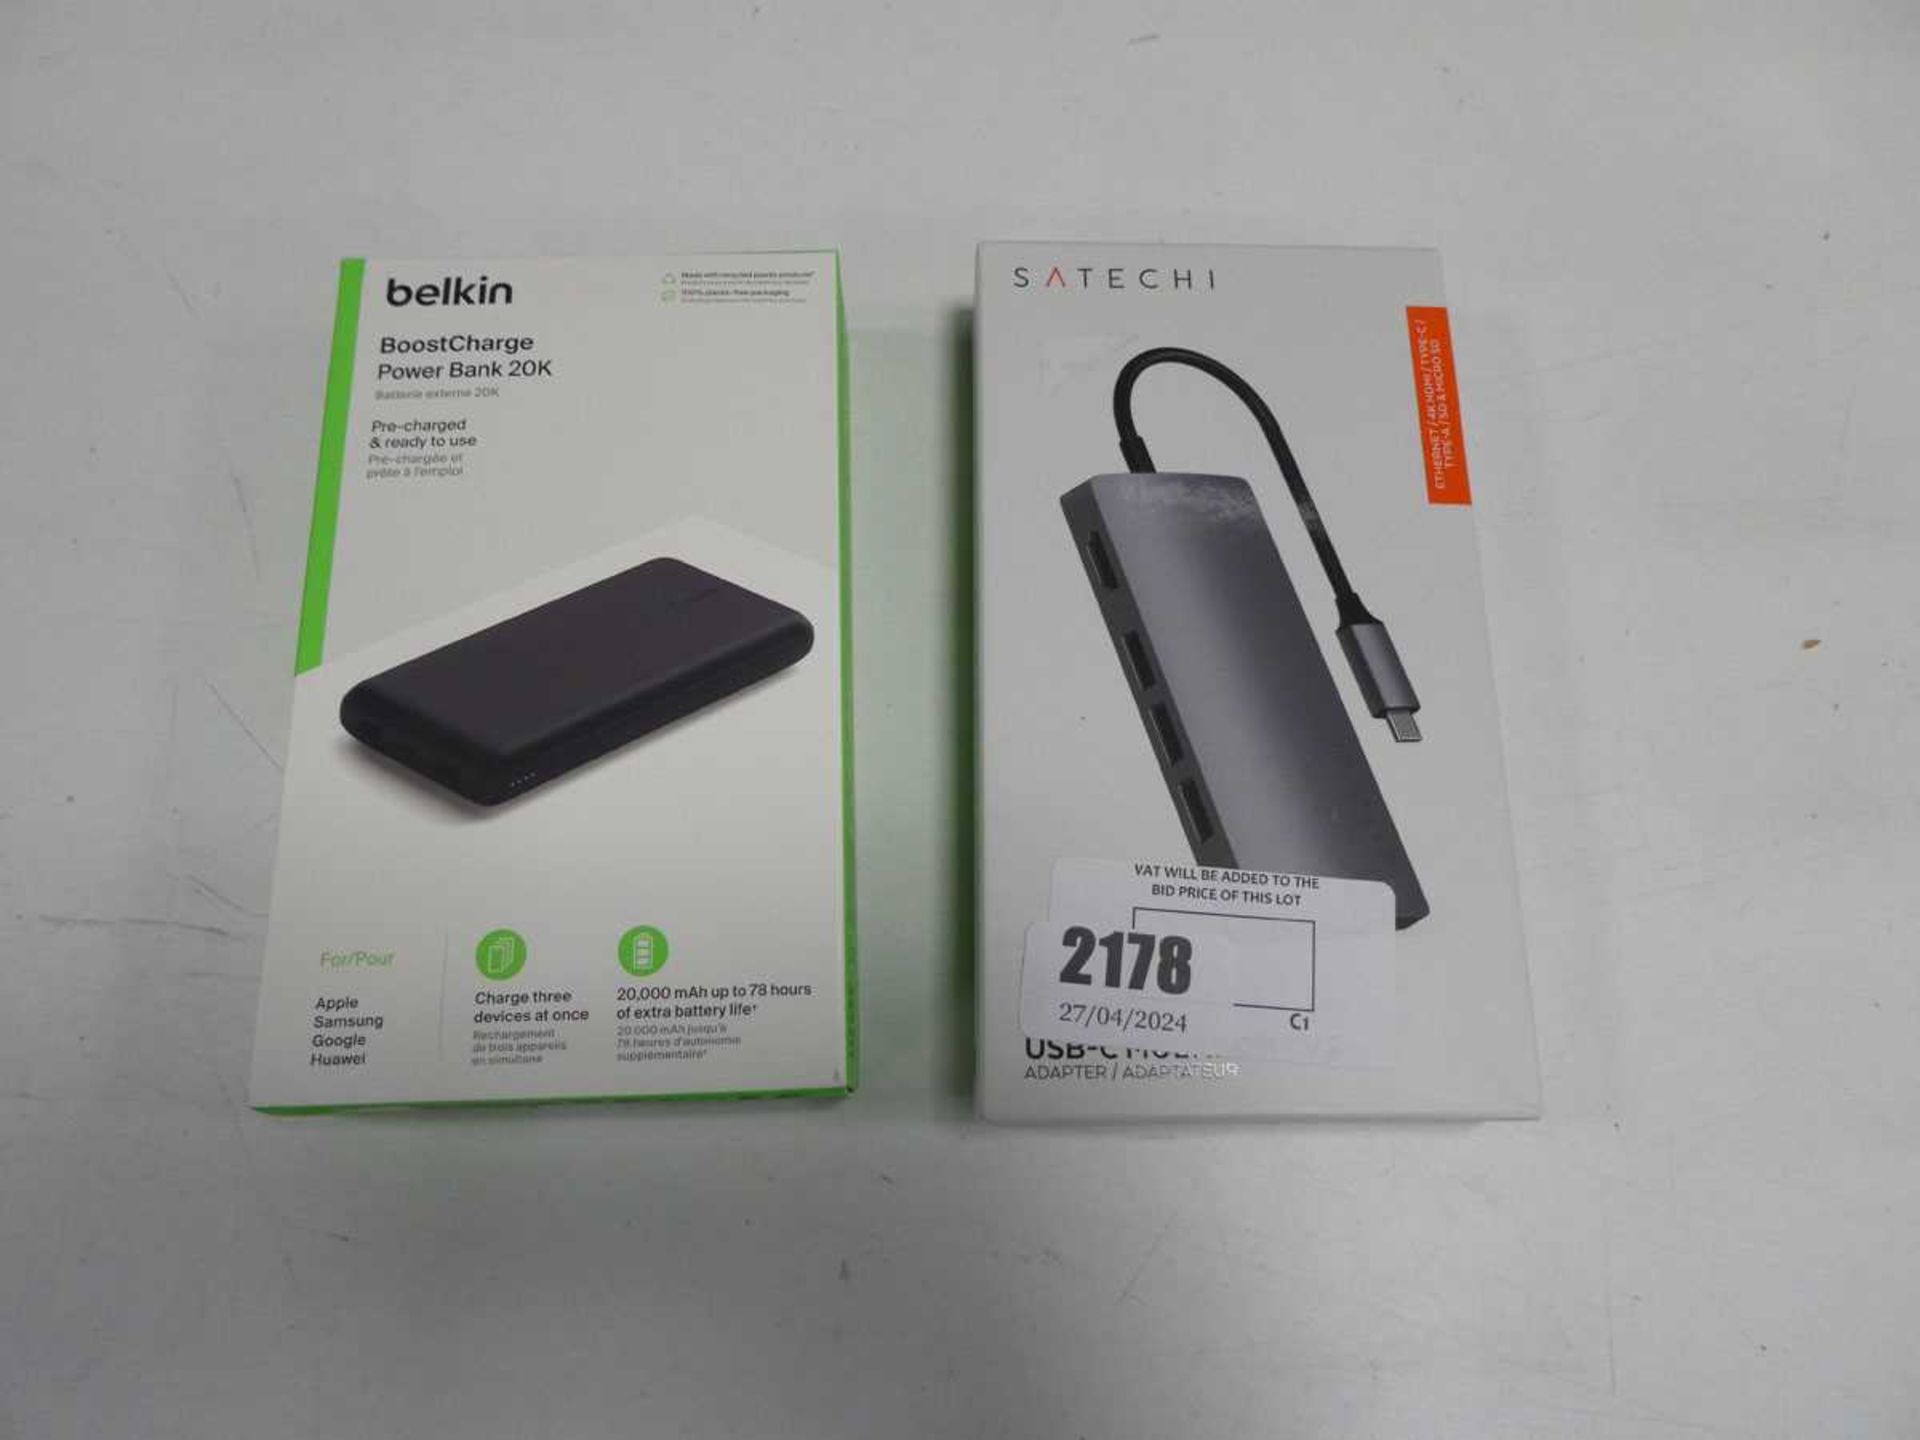 +VAT Belkin Boost Charge power bank and a Satechi USB-C adapter